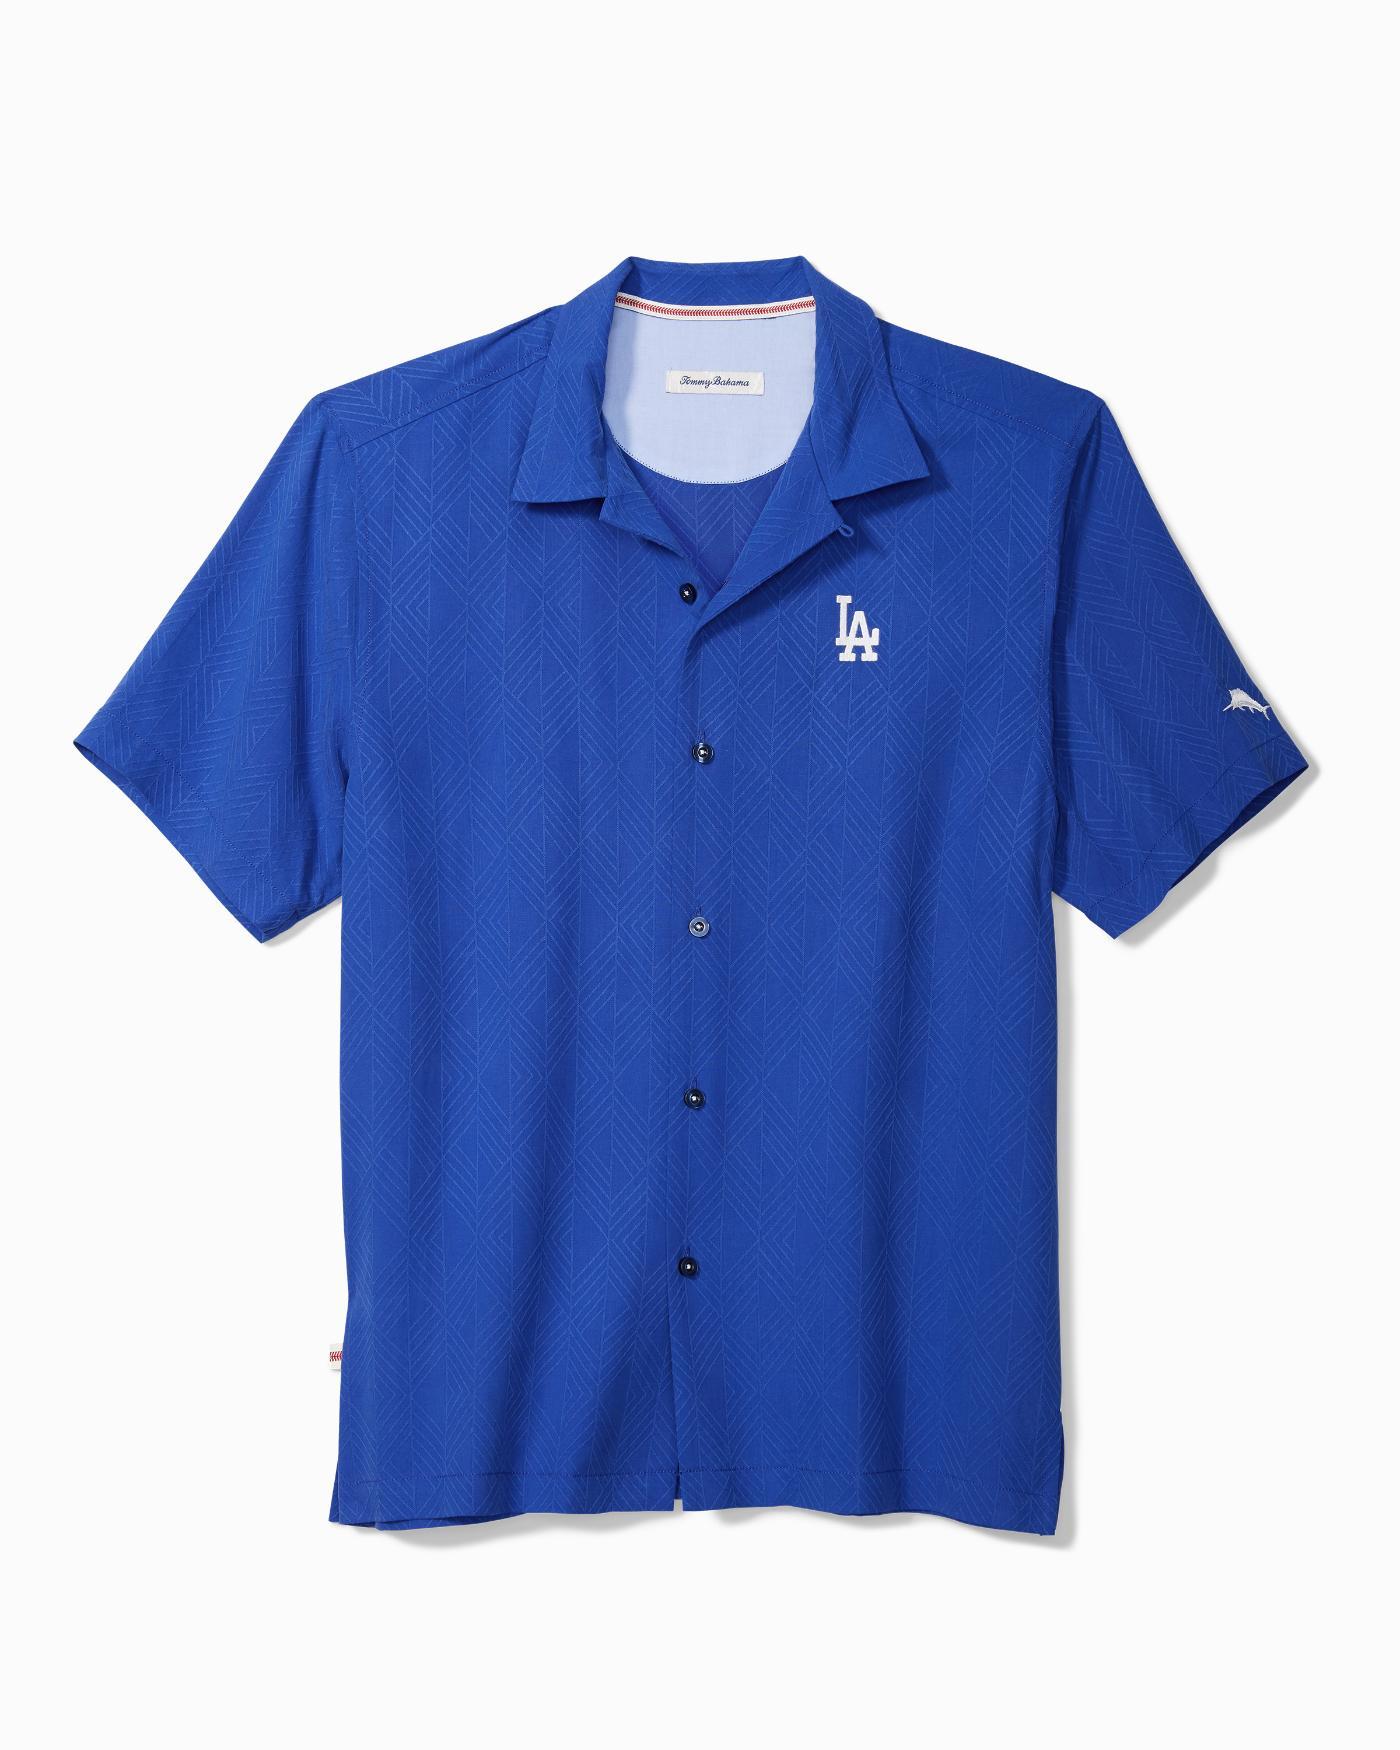 Tommy Bahama Silk Mlb® Strike One Dodgers Camp Shirt in Blue for Men - Lyst